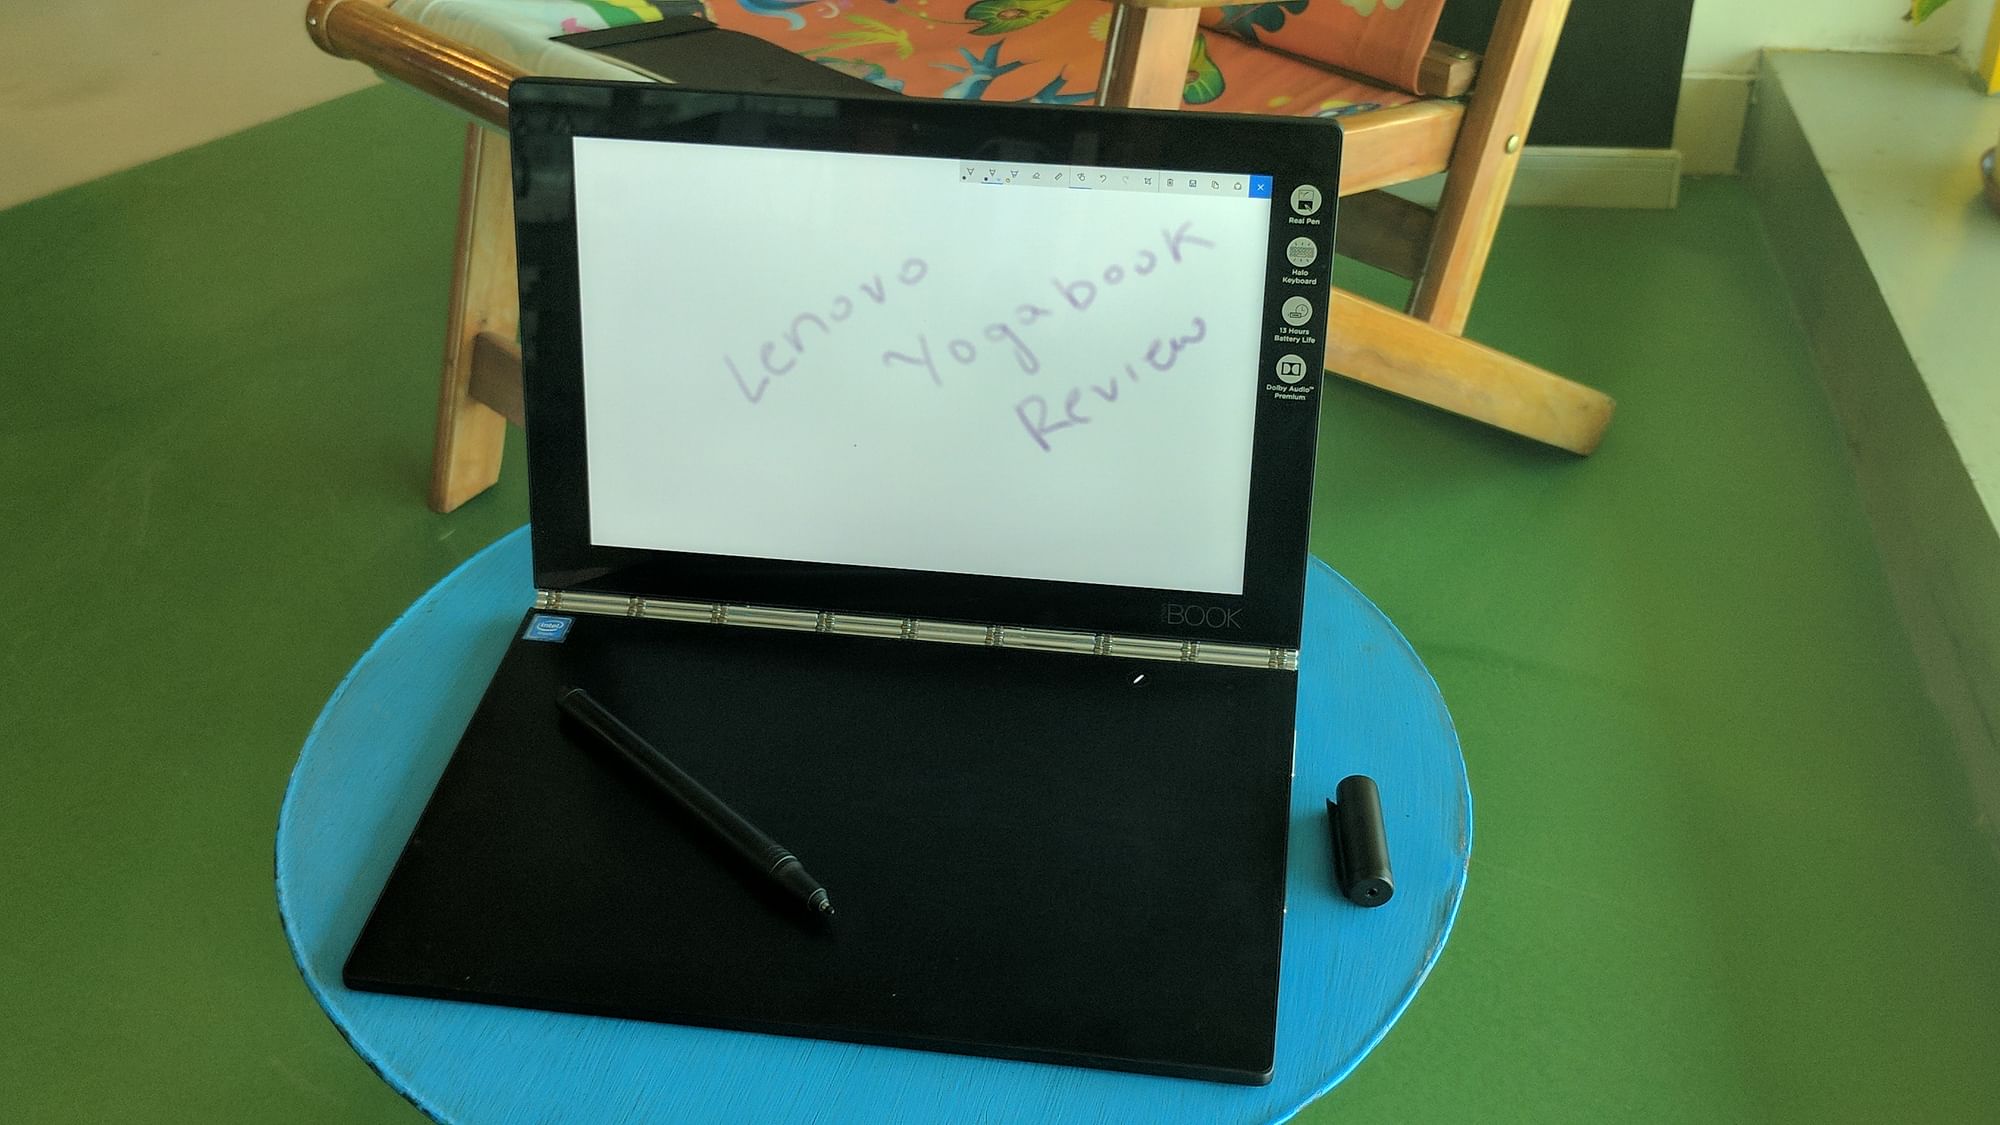 Lenovo Yoga Book comes bundled with a stylus. (Photo: <b>The Quint</b>)